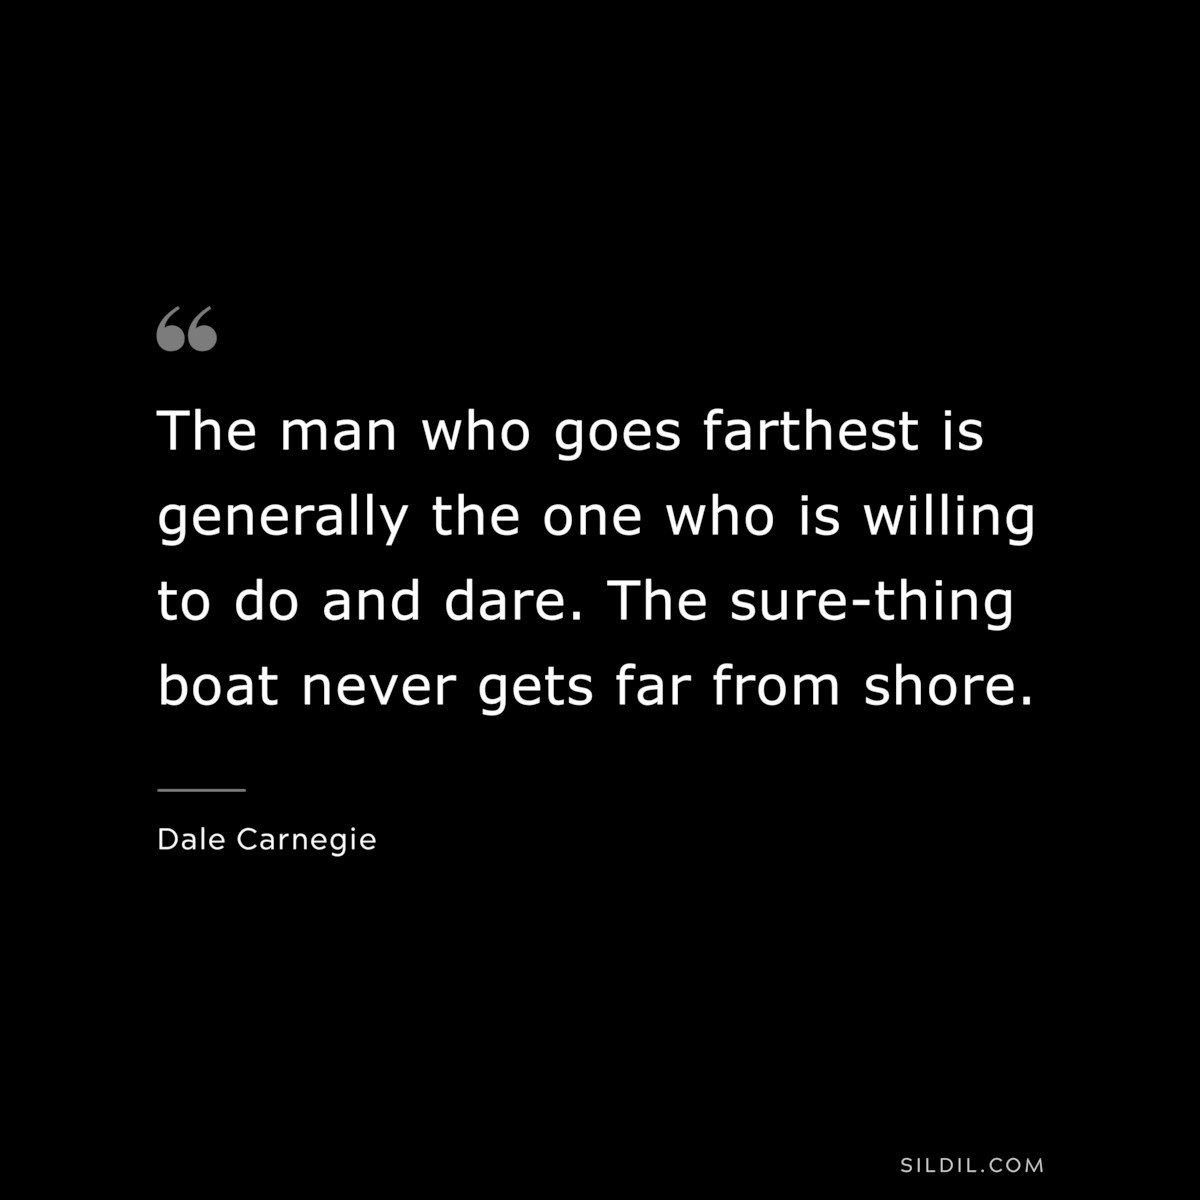 The man who goes farthest is generally the one who is willing to do and dare. The sure-thing boat never gets far from shore. ― Dale Carnegie